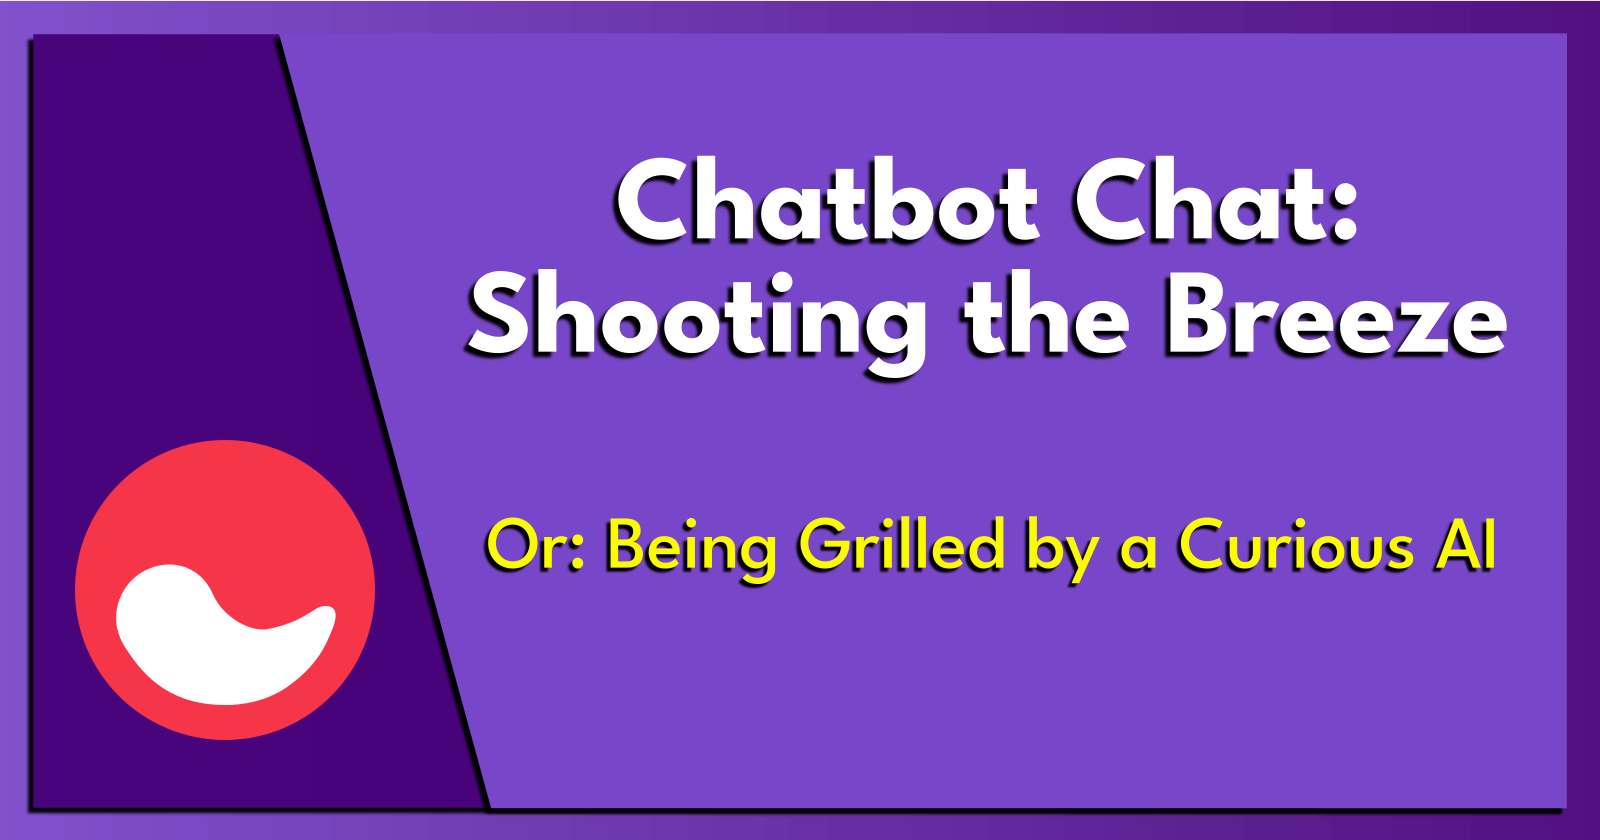 Chatbot Chat: Shooting the Breeze.